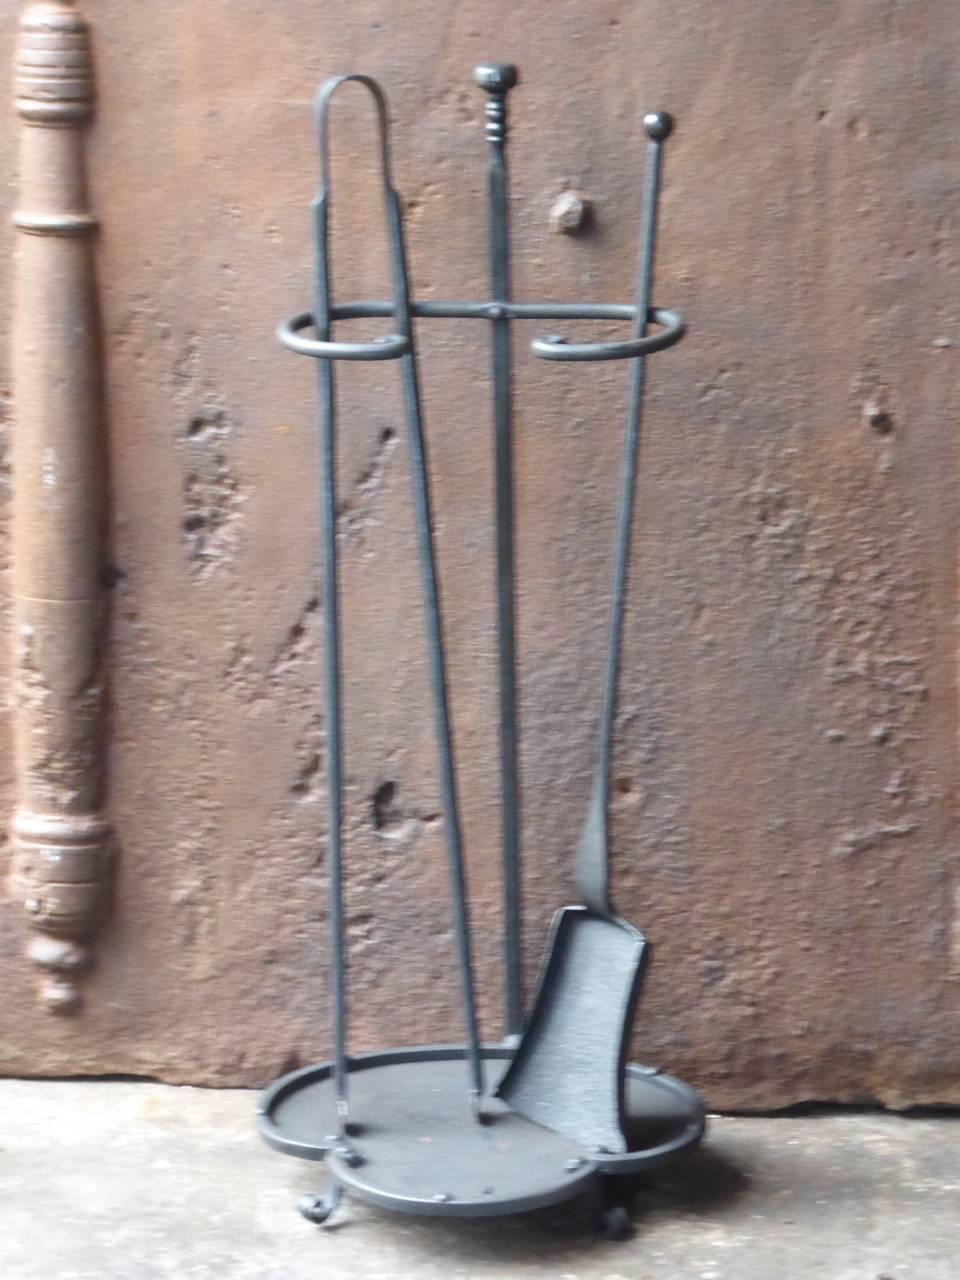 19th century French fireplace tool set, fire irons made of wrought iron.